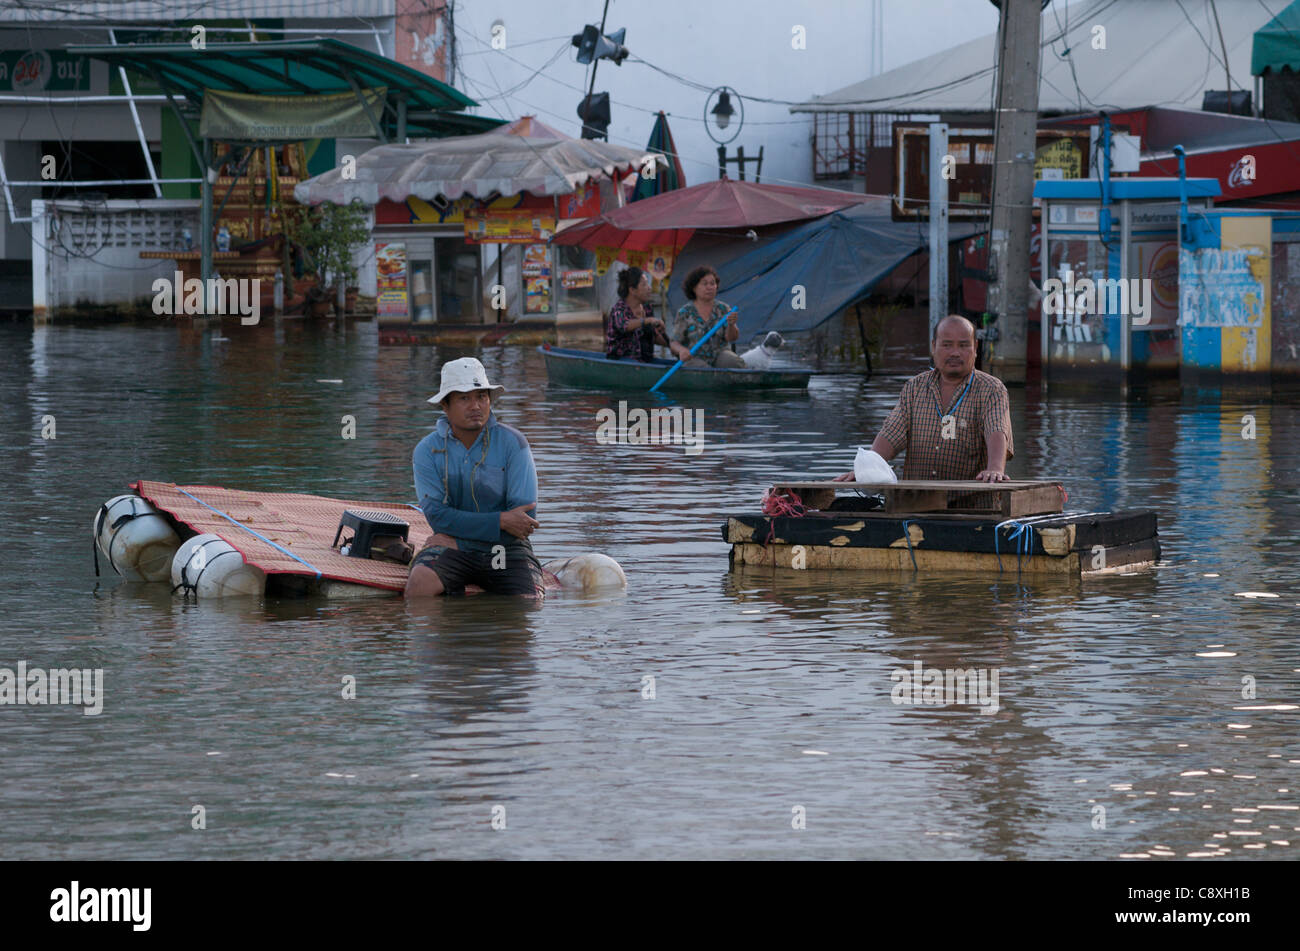 Natural disaster hits Bangkok. After weeks of flooding, boats & makeshift rafts have become the main type of transportation in Rangsit, a Northern Suburb of Bangkok, Thailand. Wednesday, November 2nd, 2011. Thailand is experiencing its worst flooding in more than 50 years. Credit Line: Kraig Lieb / Alamy Live News. Stock Photo